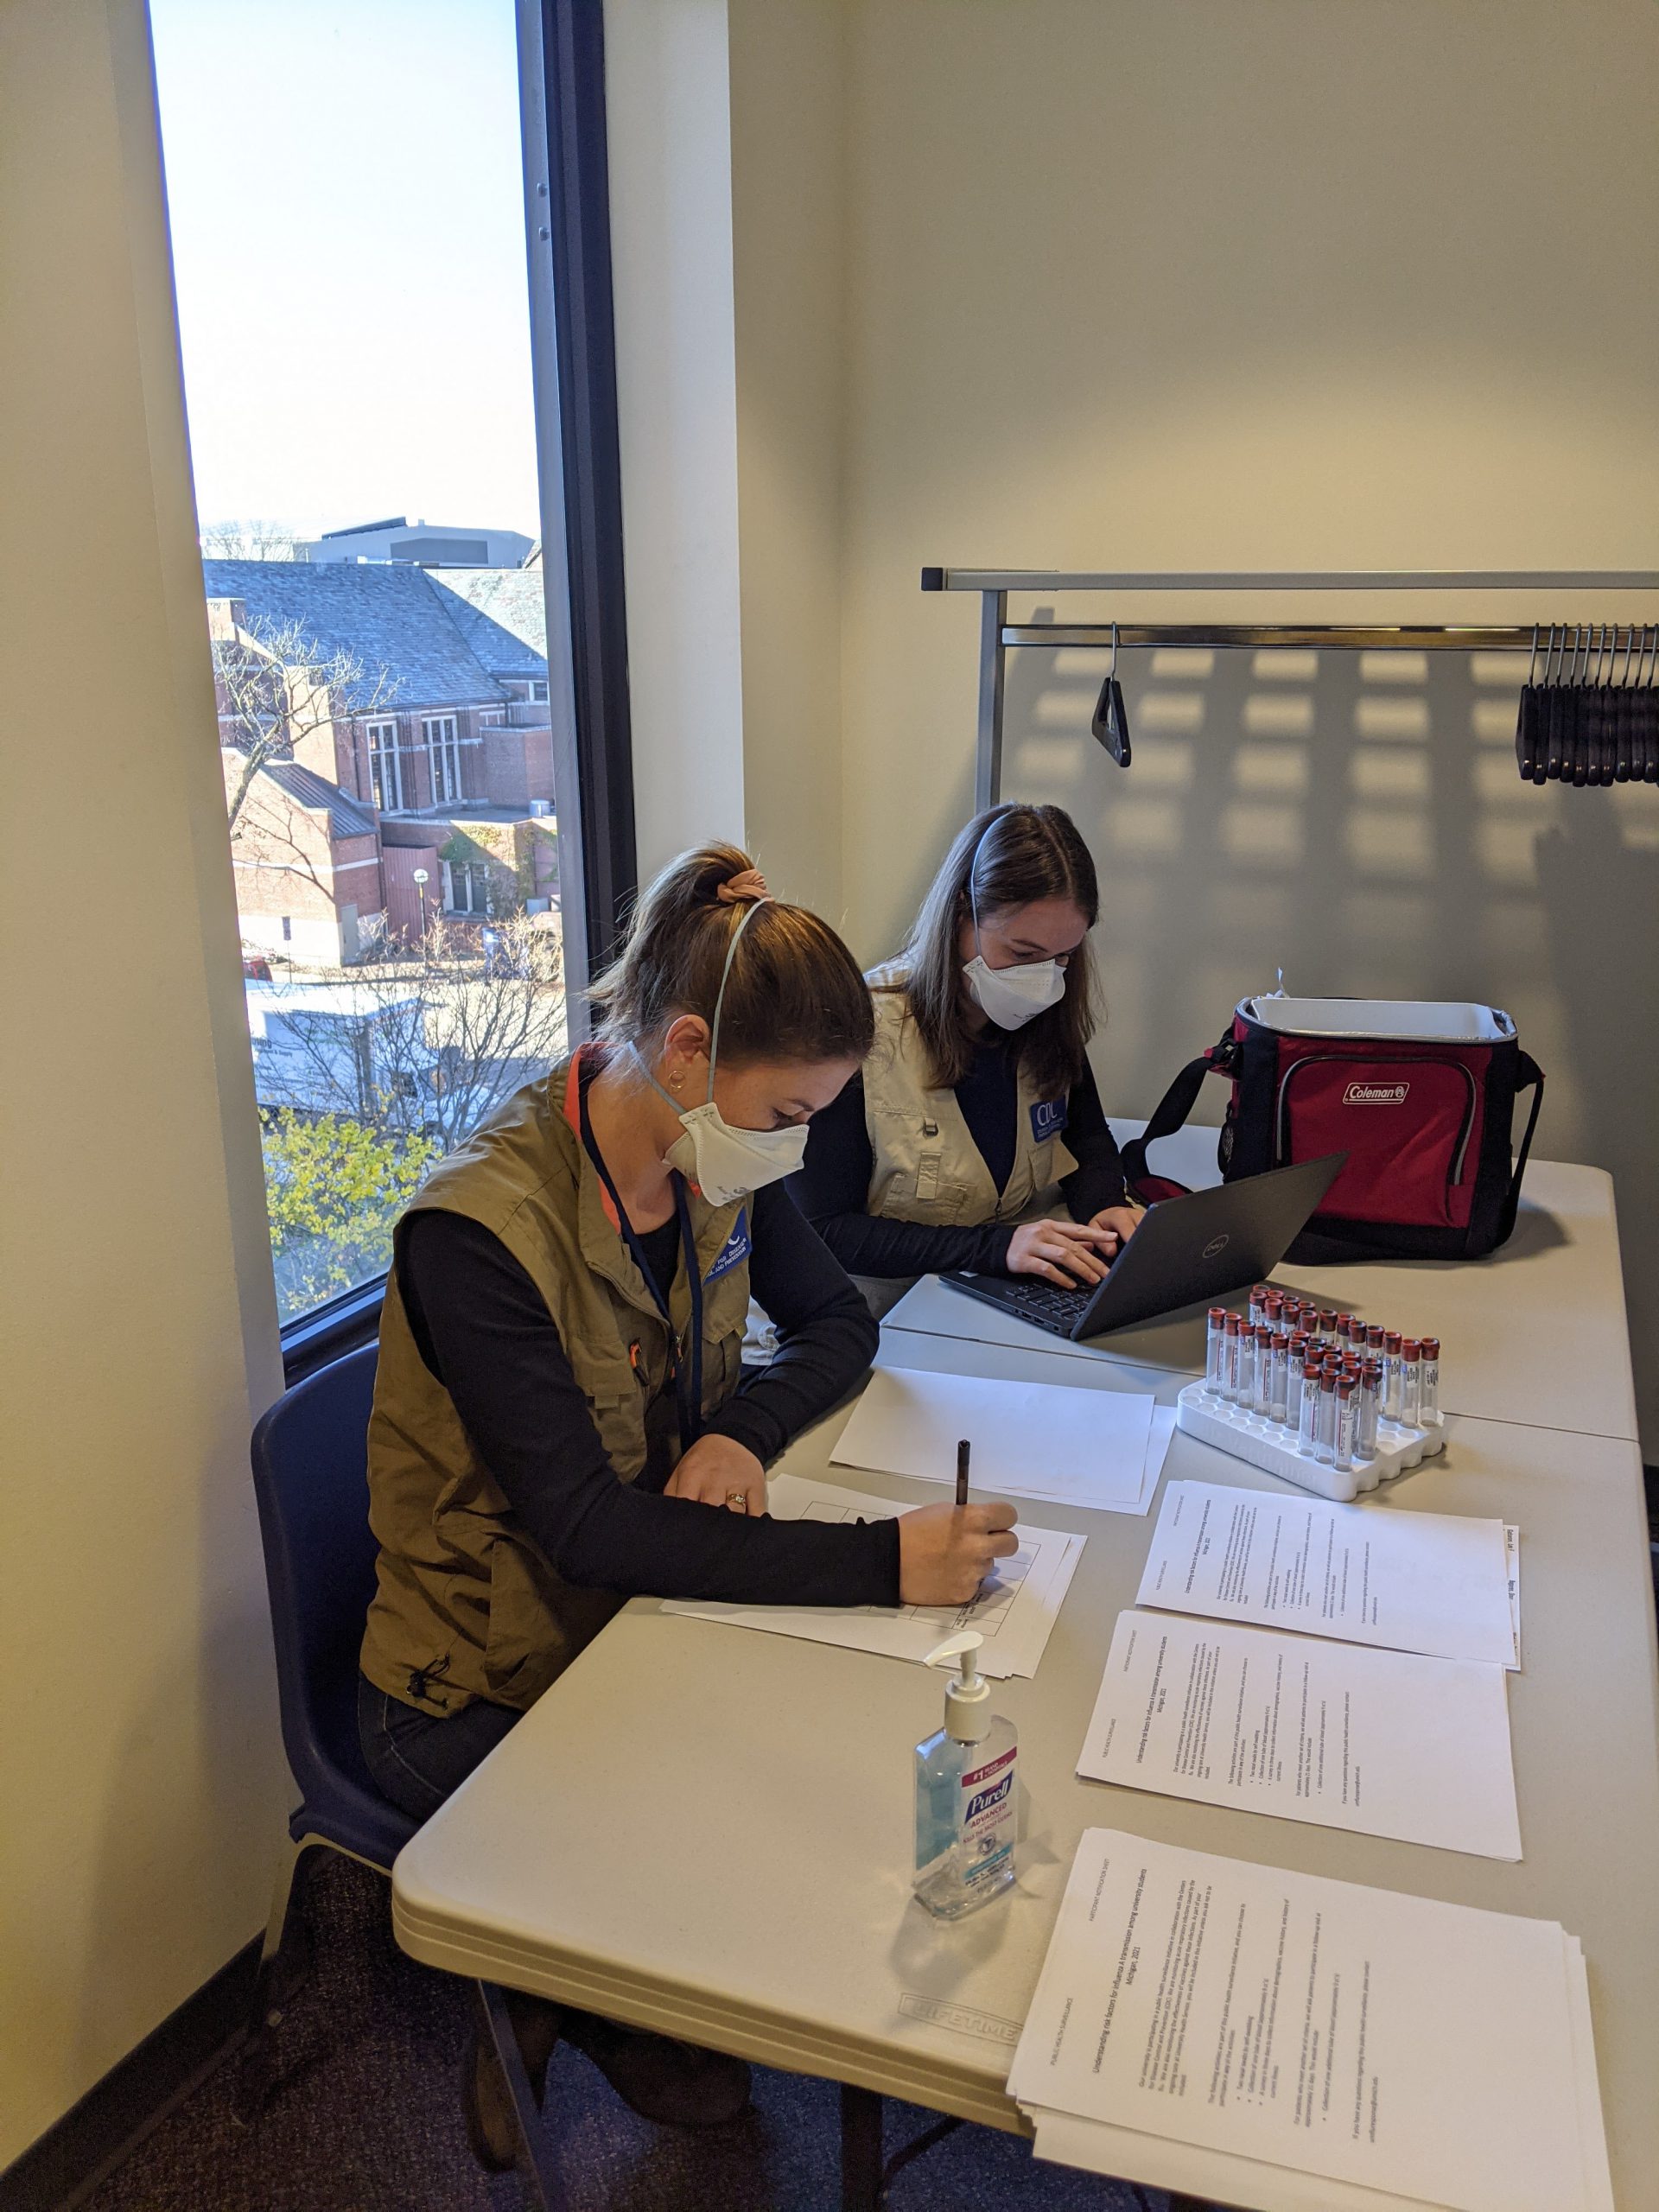 EIS officers Kelsey Sumner (left) and Miranda Delahoy (right) collect student information and specimens to investigate an influenza A outbreak on a university campus during the COVID-19 pandemic in November 2021.